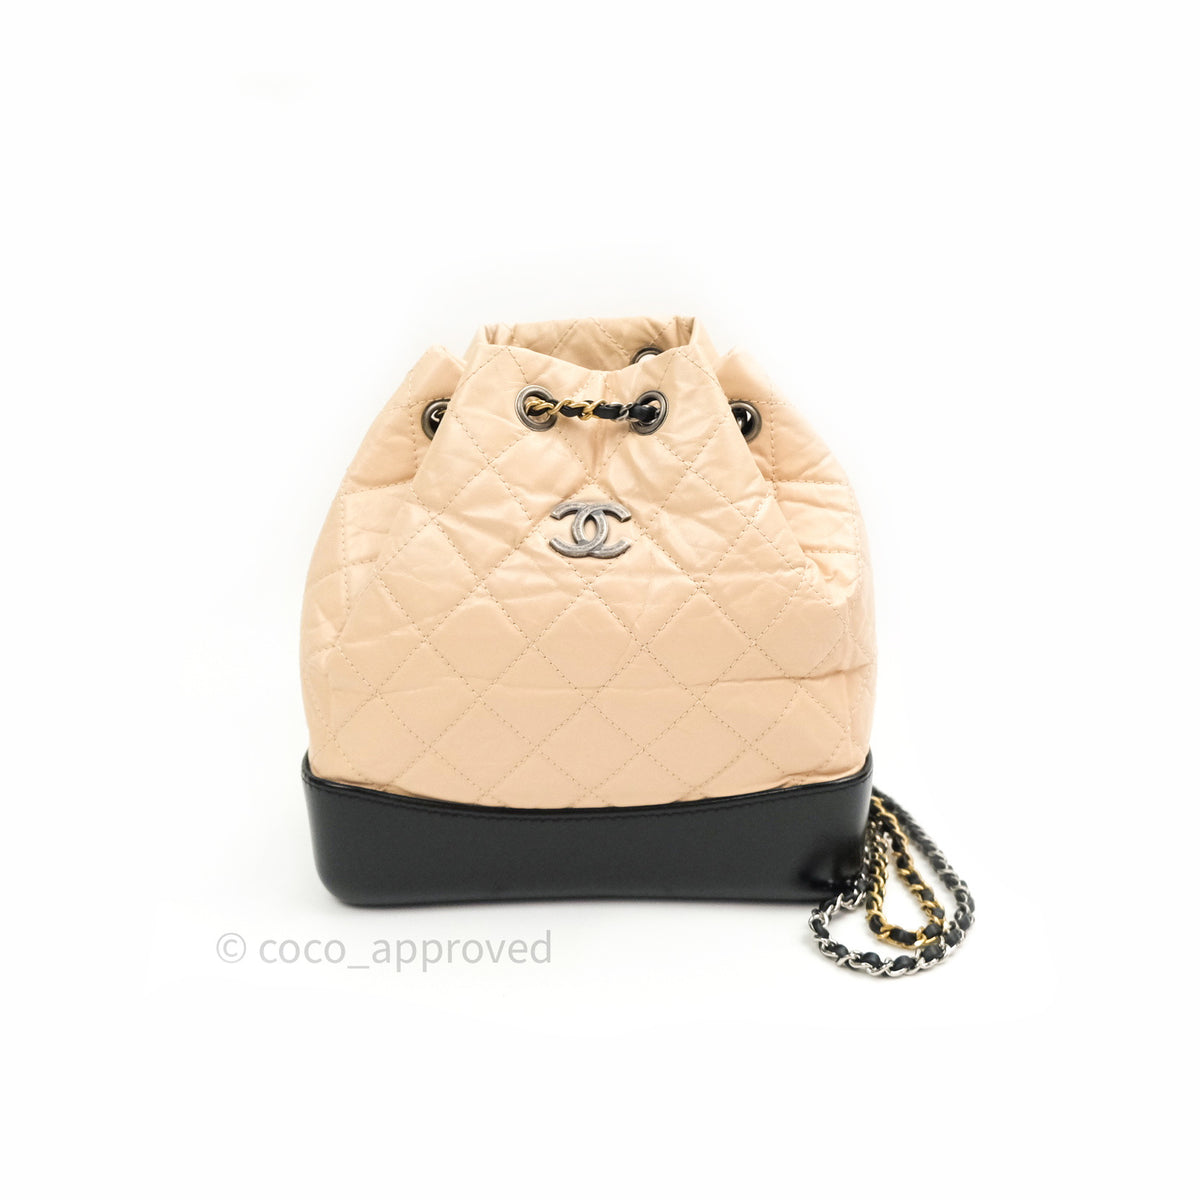 Chanel Beige Clair/Black Small Gabrielle Backpack Bag – Boutique